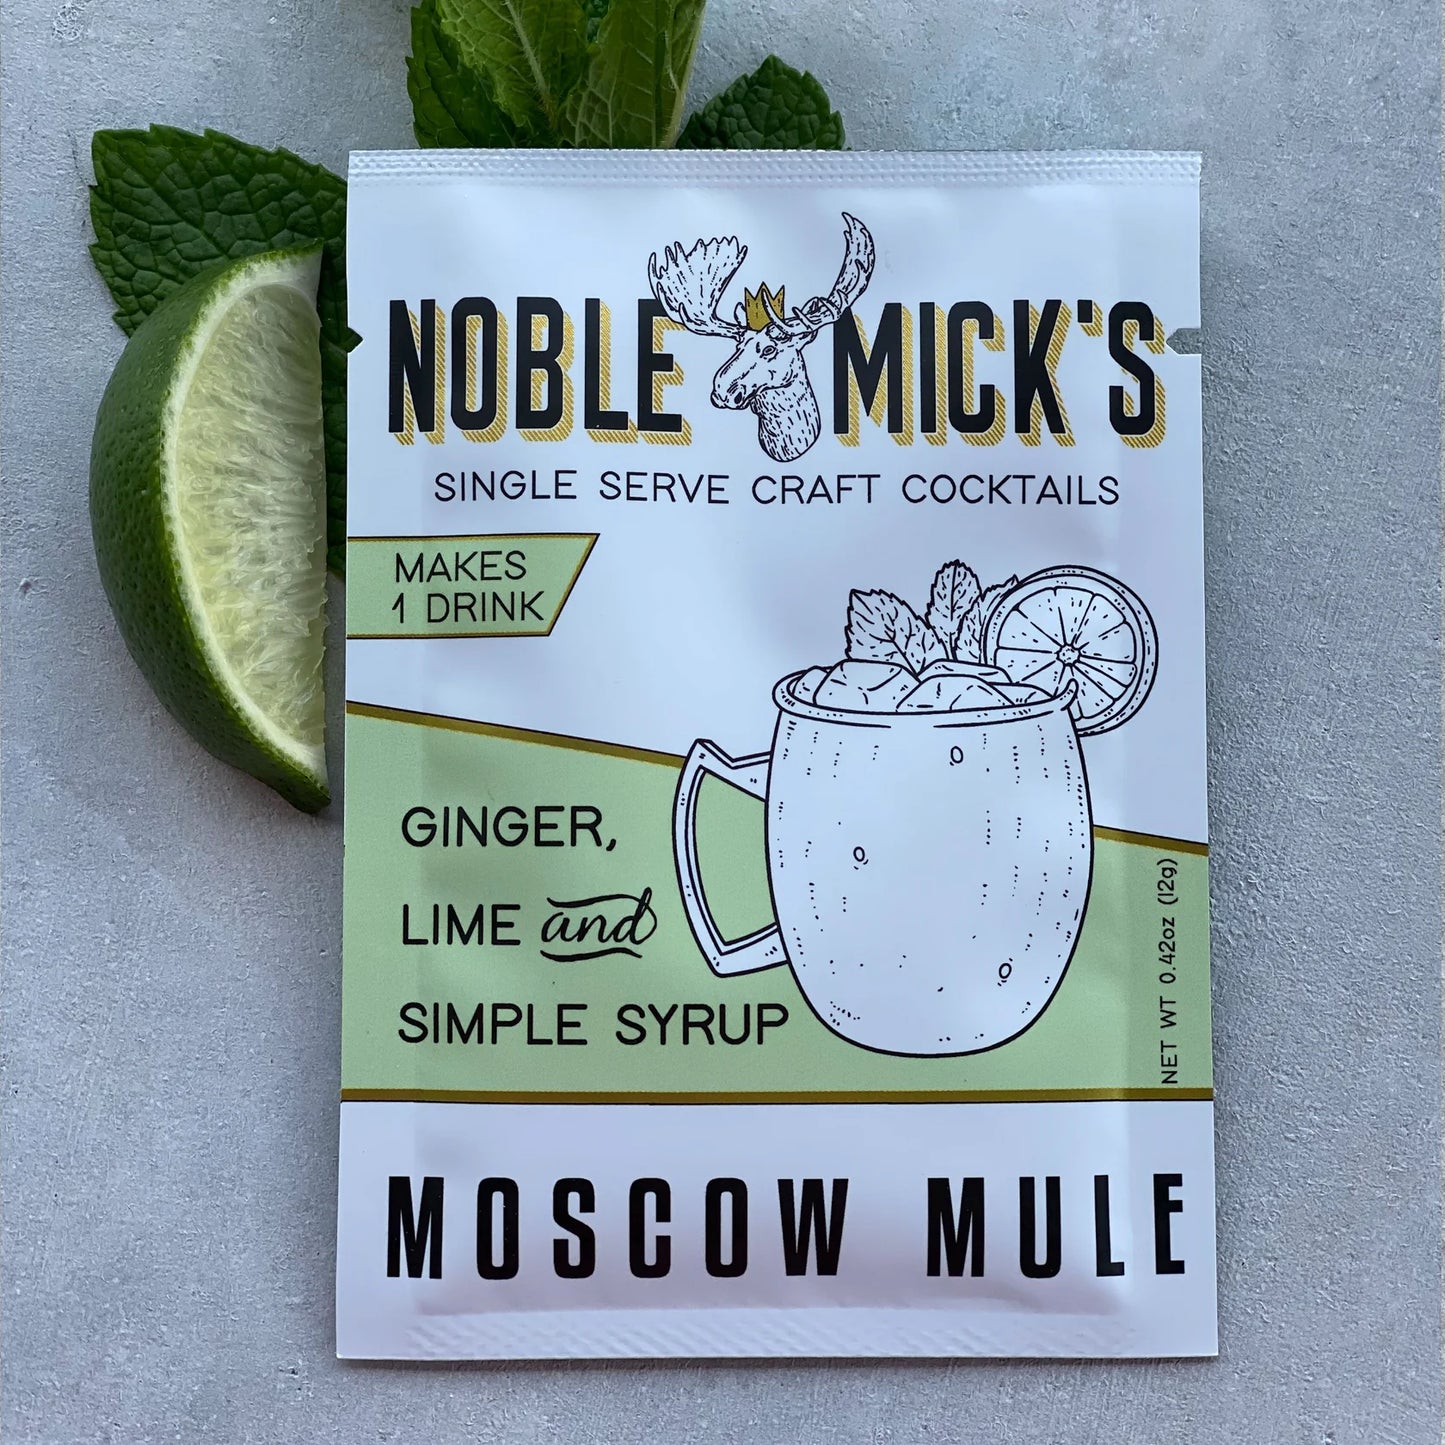 Noble Mick’s Single Serve Craft Cocktail- Moscow Mule